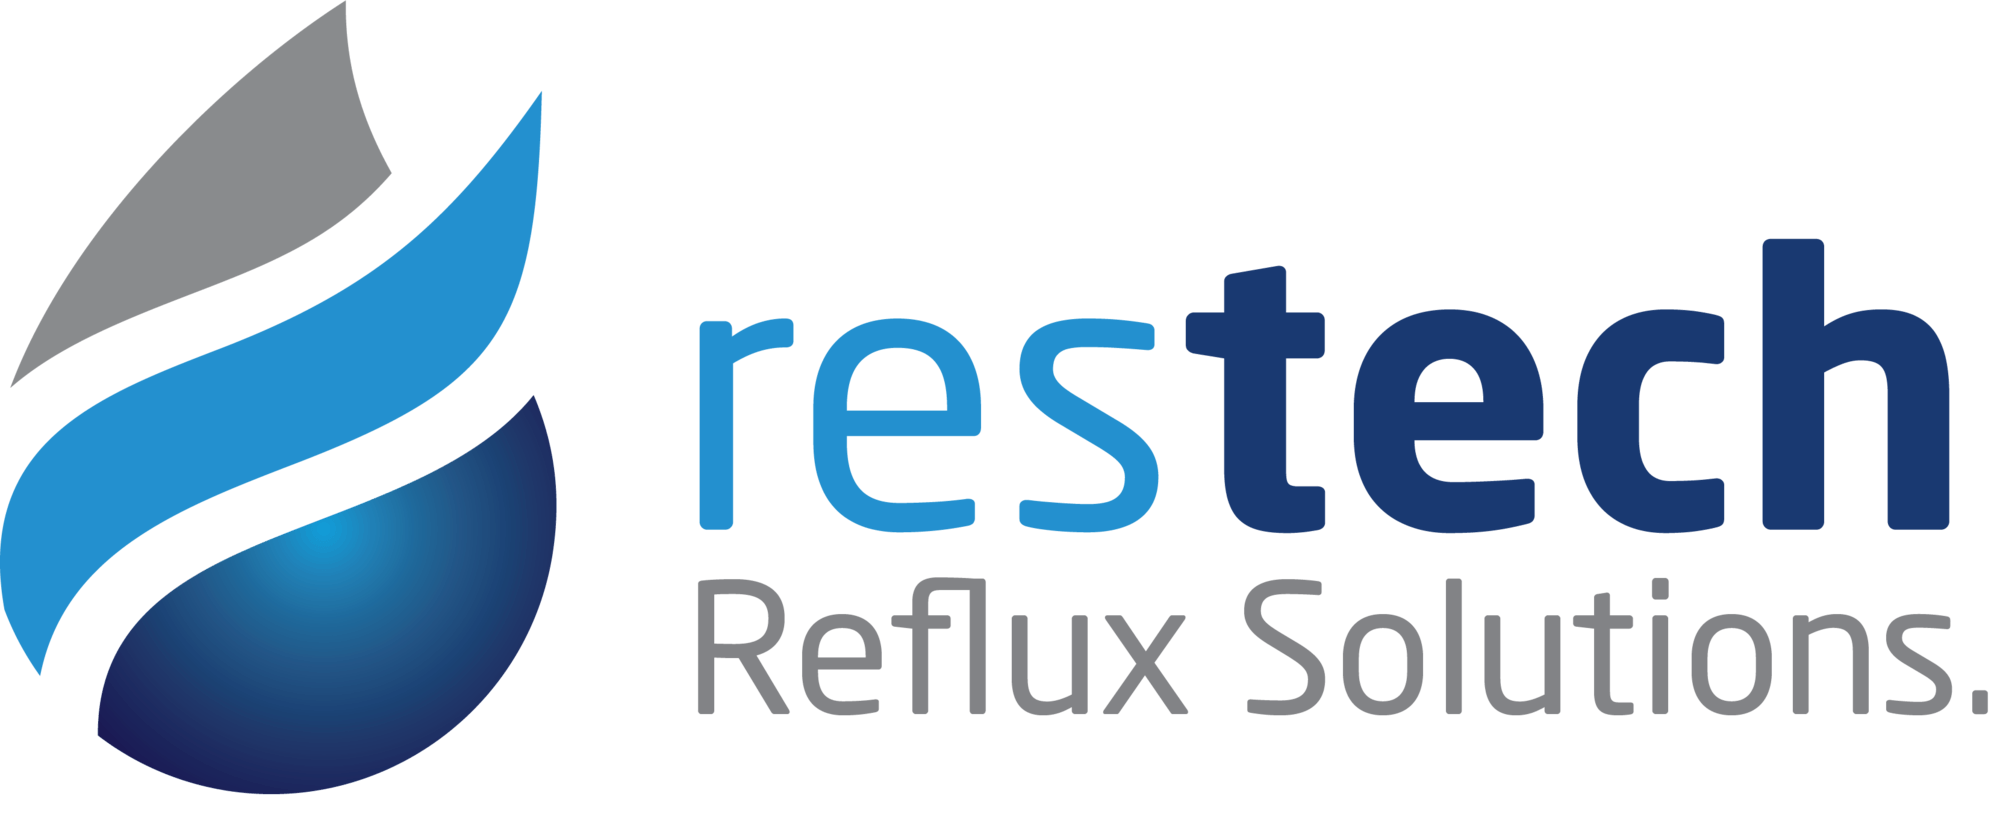 Reflux: Is the Treatment More Risky than the Disease?